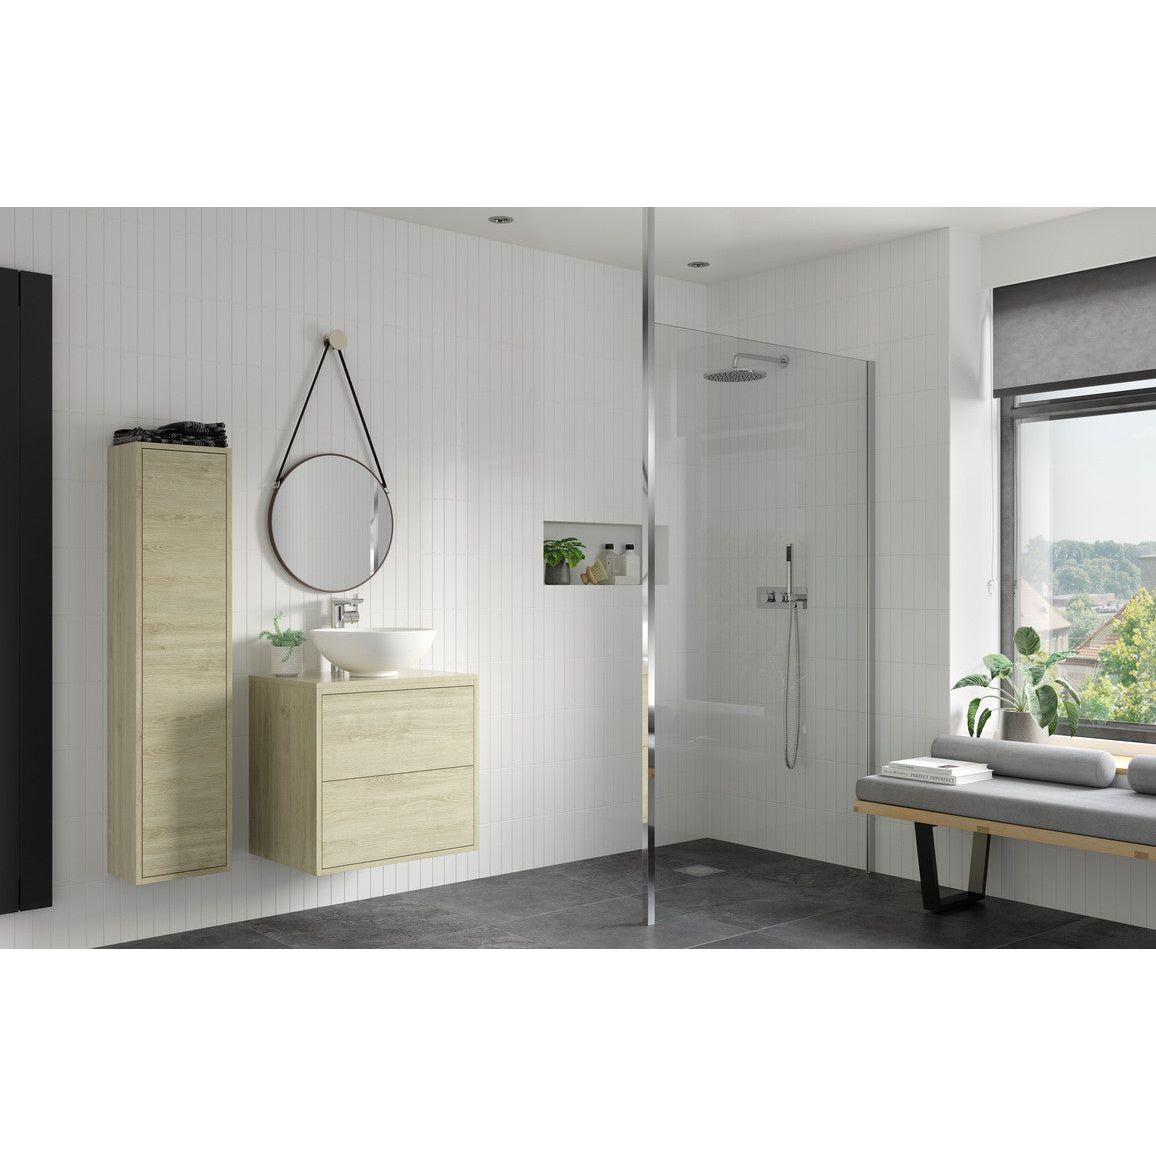 Montague 1400mm Wetroom Panel & Floor-to-Ceiling Pole - Chrome